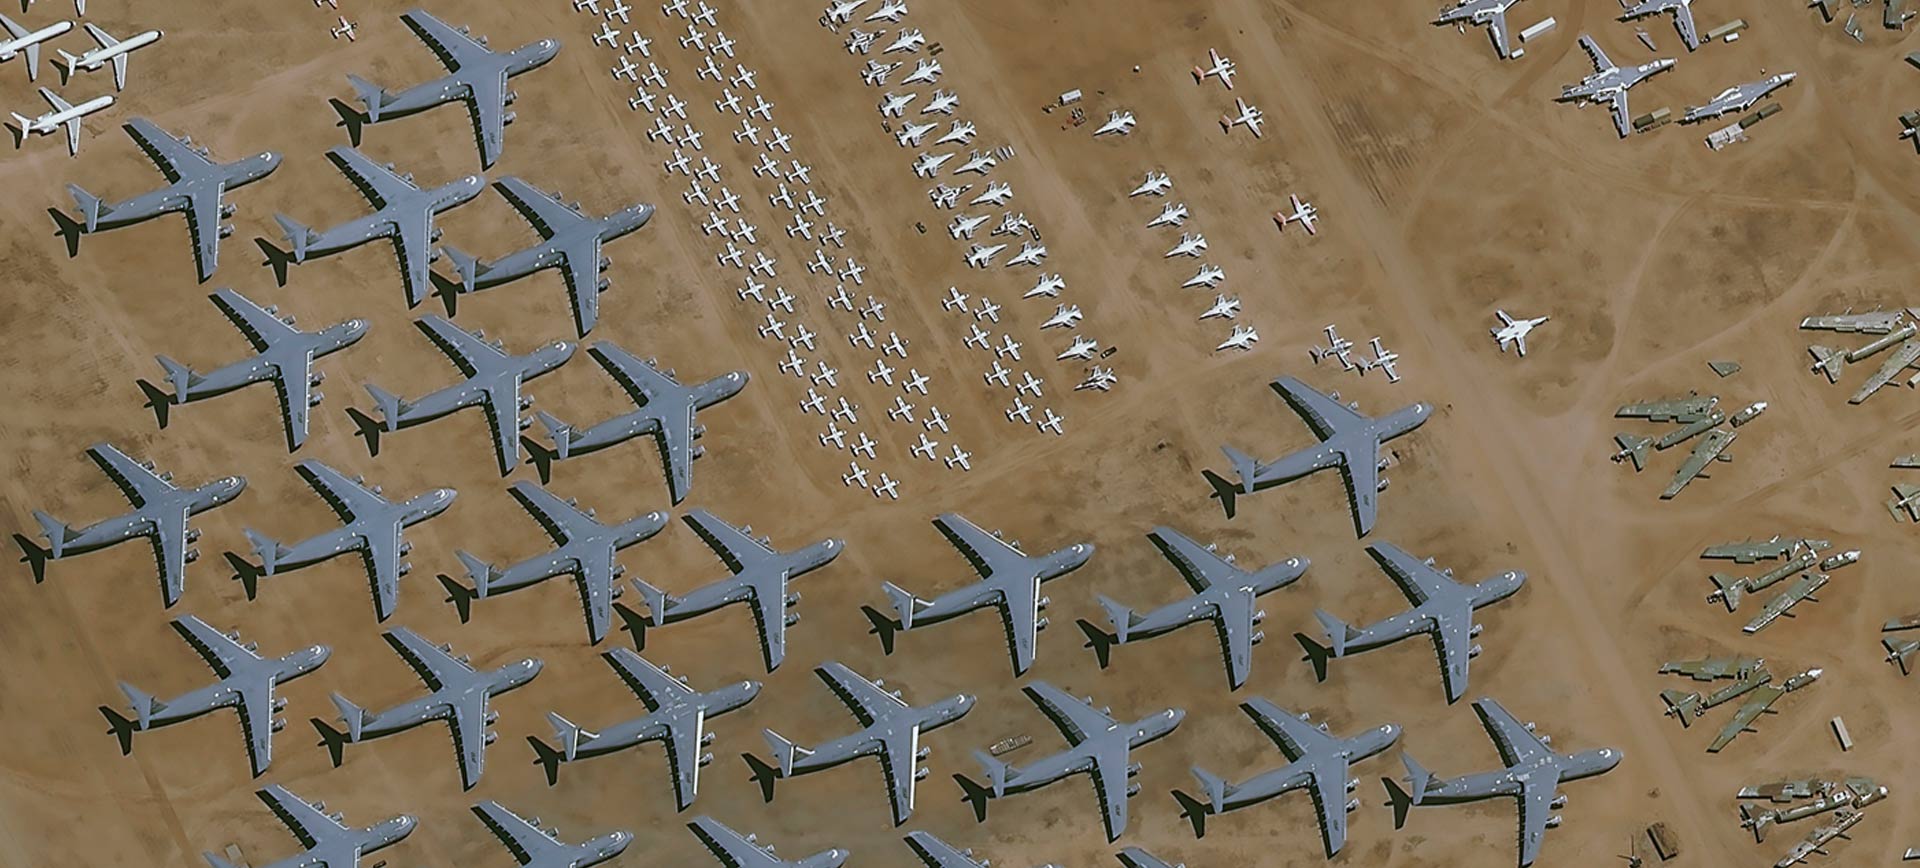 Pléiades Neo Satellte Image - Tucson - The Largest Aircraft Graveyard in the World